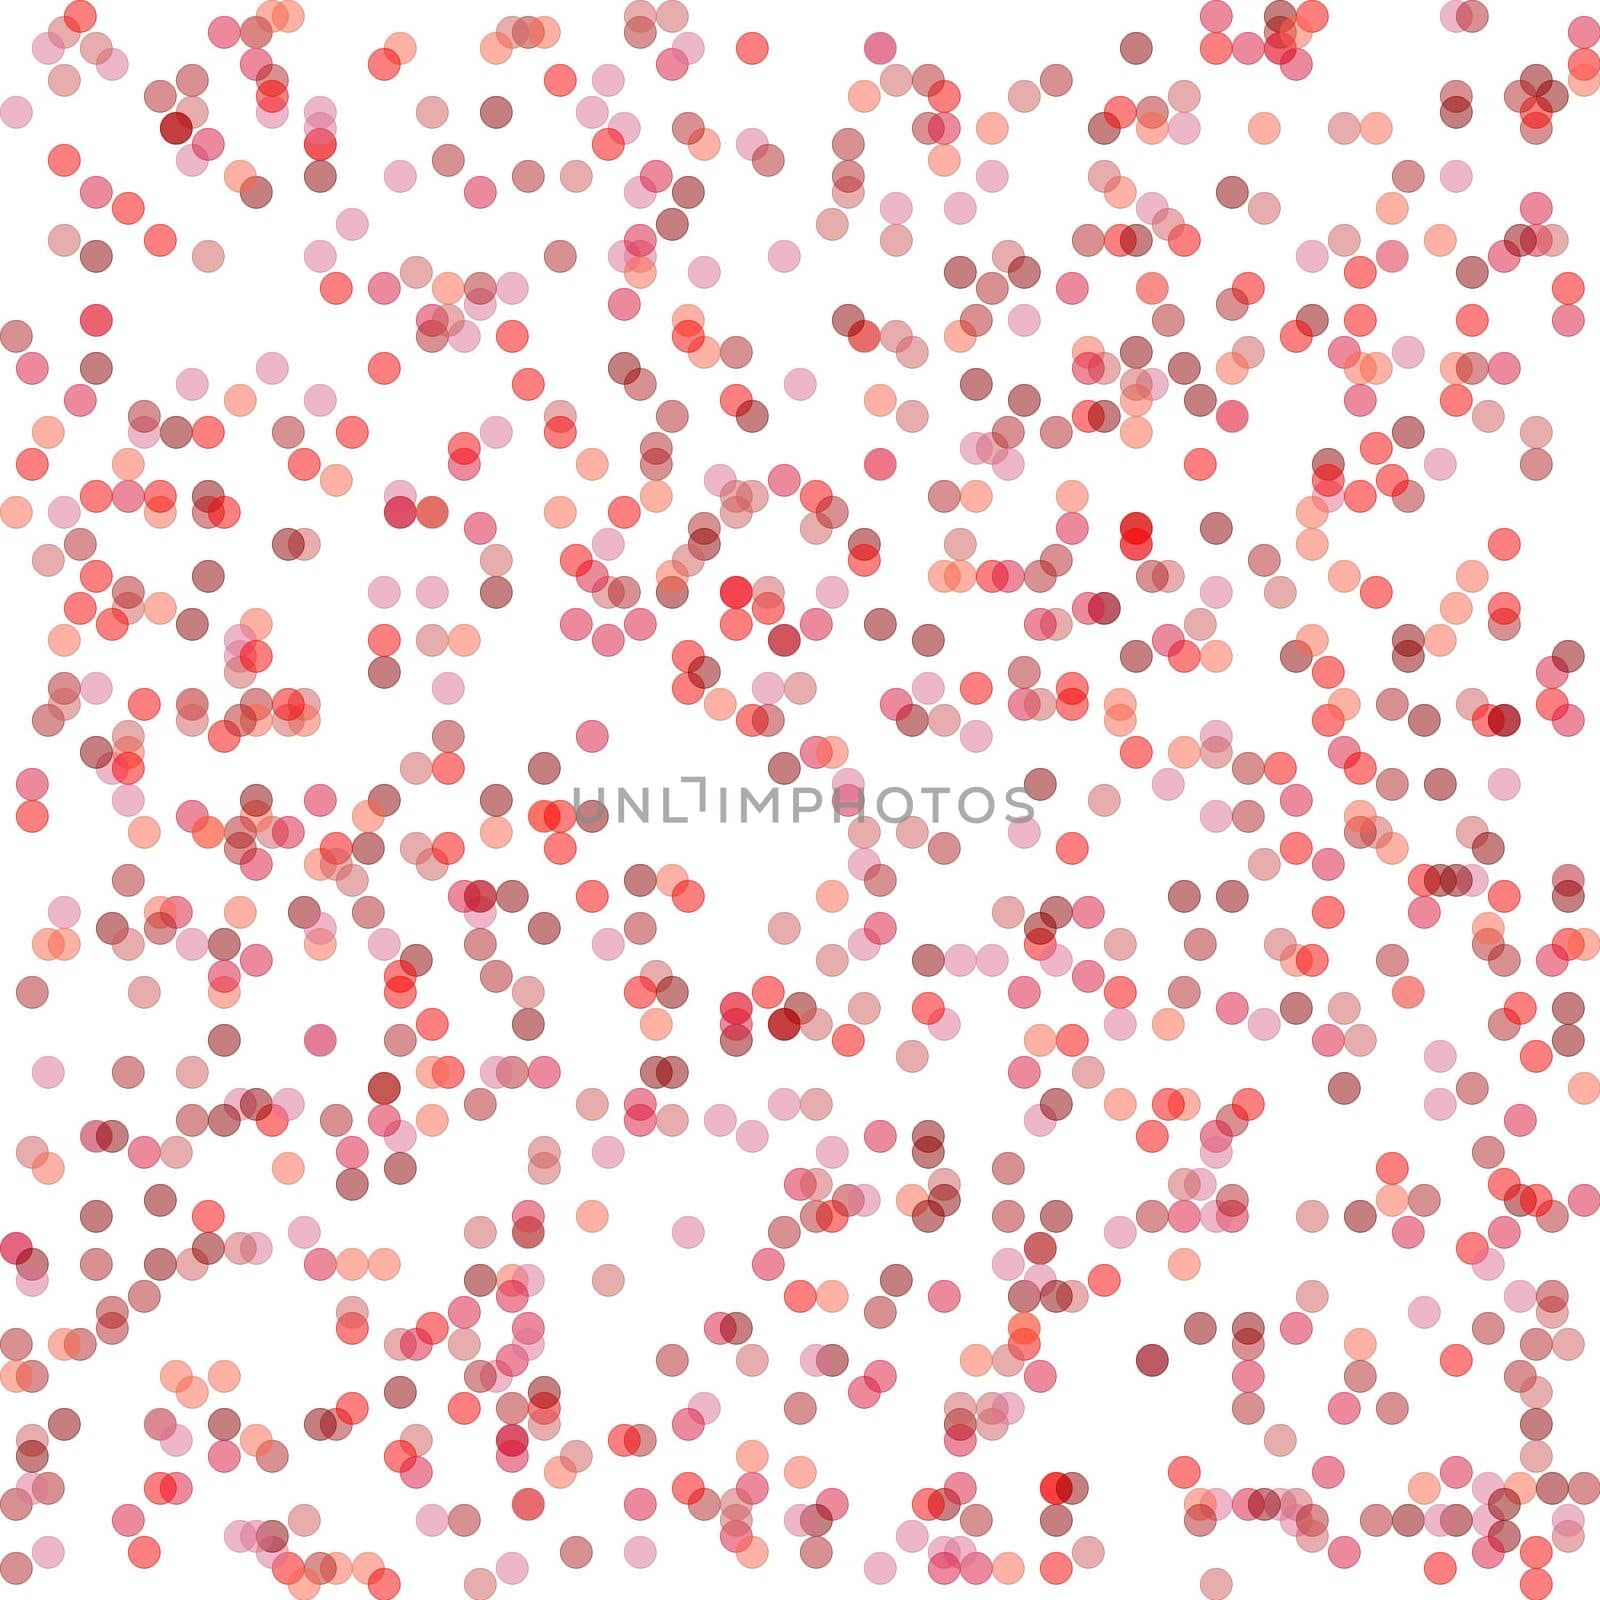 Abstract minimalist red illustration with circles useful as a background